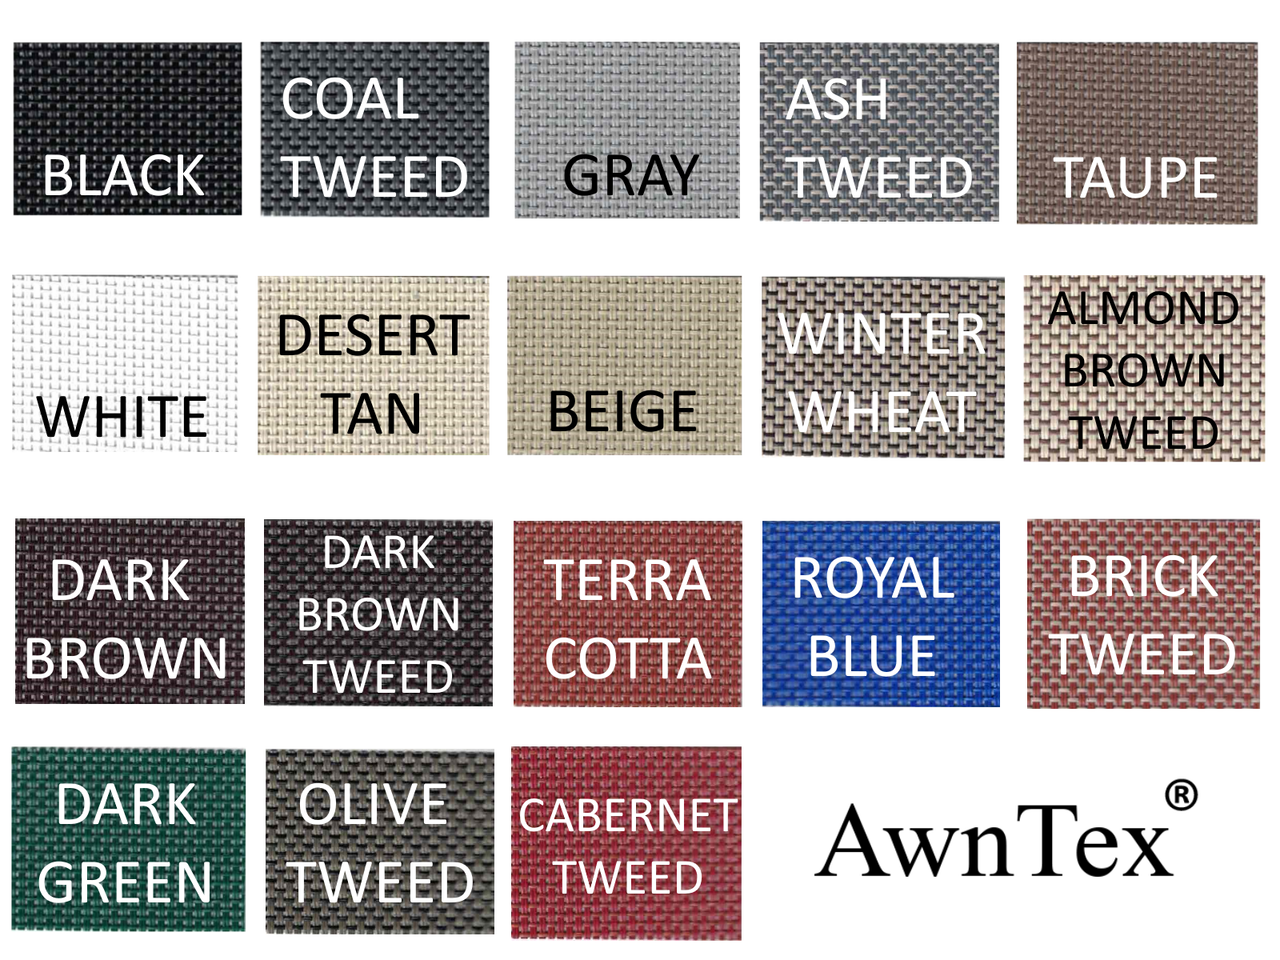 The Tank Beret by SLO Sail and Canvas is available in many colors of high quality Awntex 160 Vinyl Mesh.